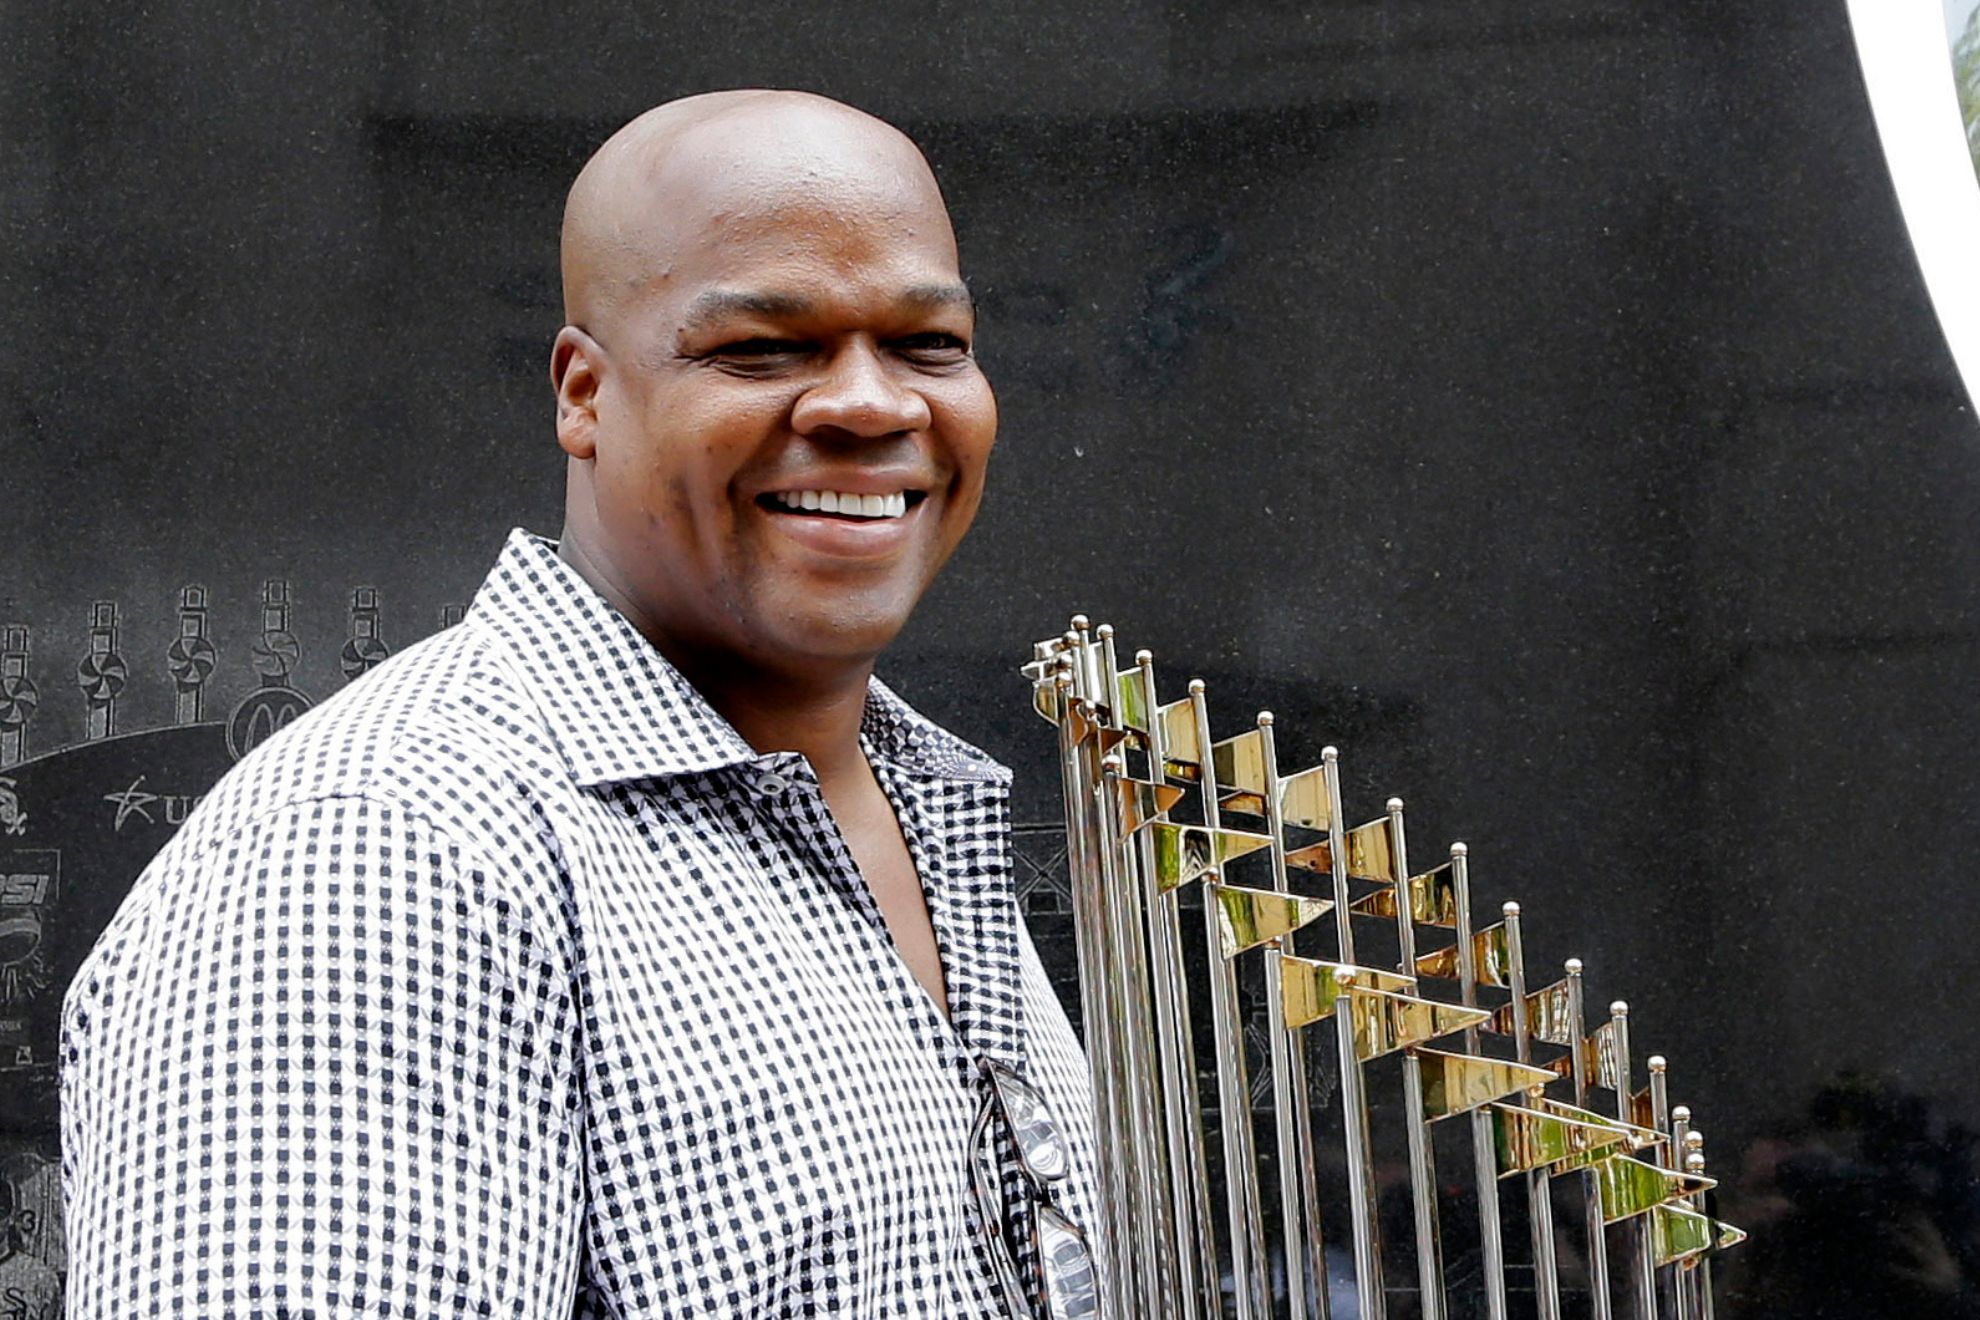 Ex-MLB star hits out at Fox News, his former employer, for claiming he died